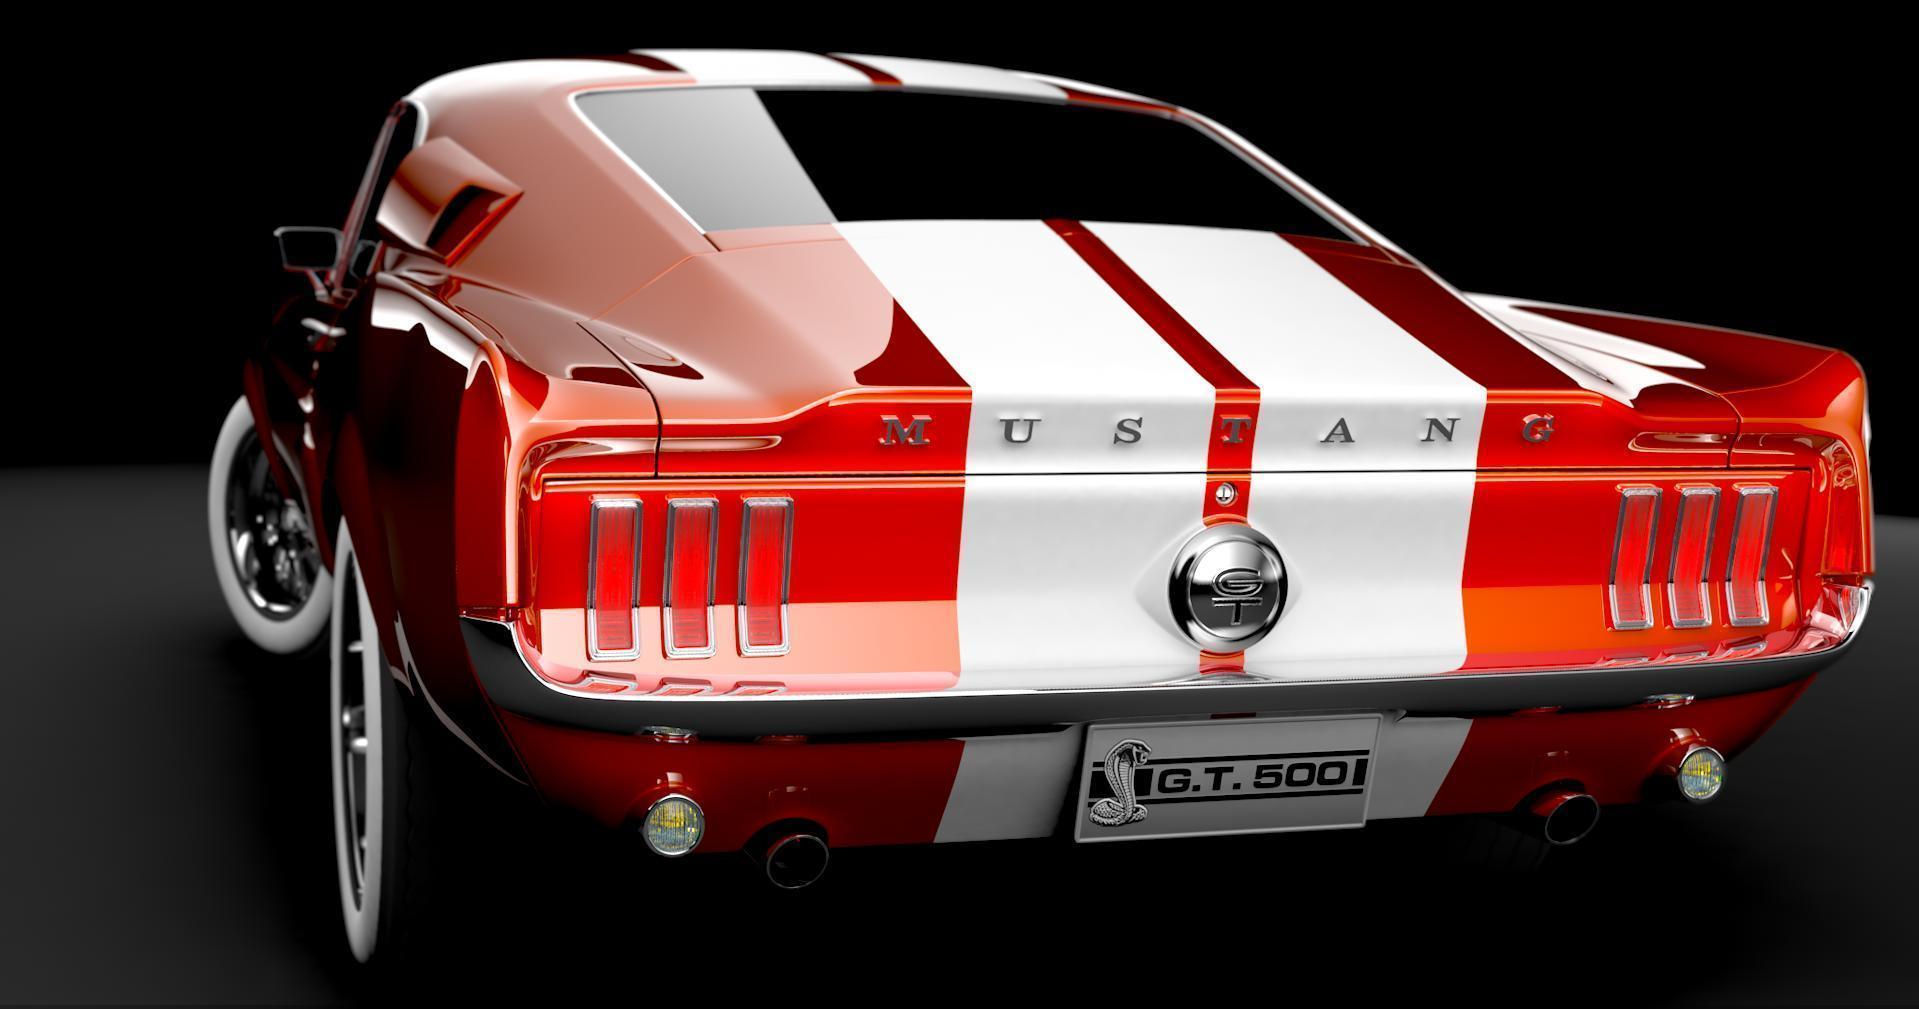 Ford Mustang Red Wallpaper. High Definition Wallpaper, High